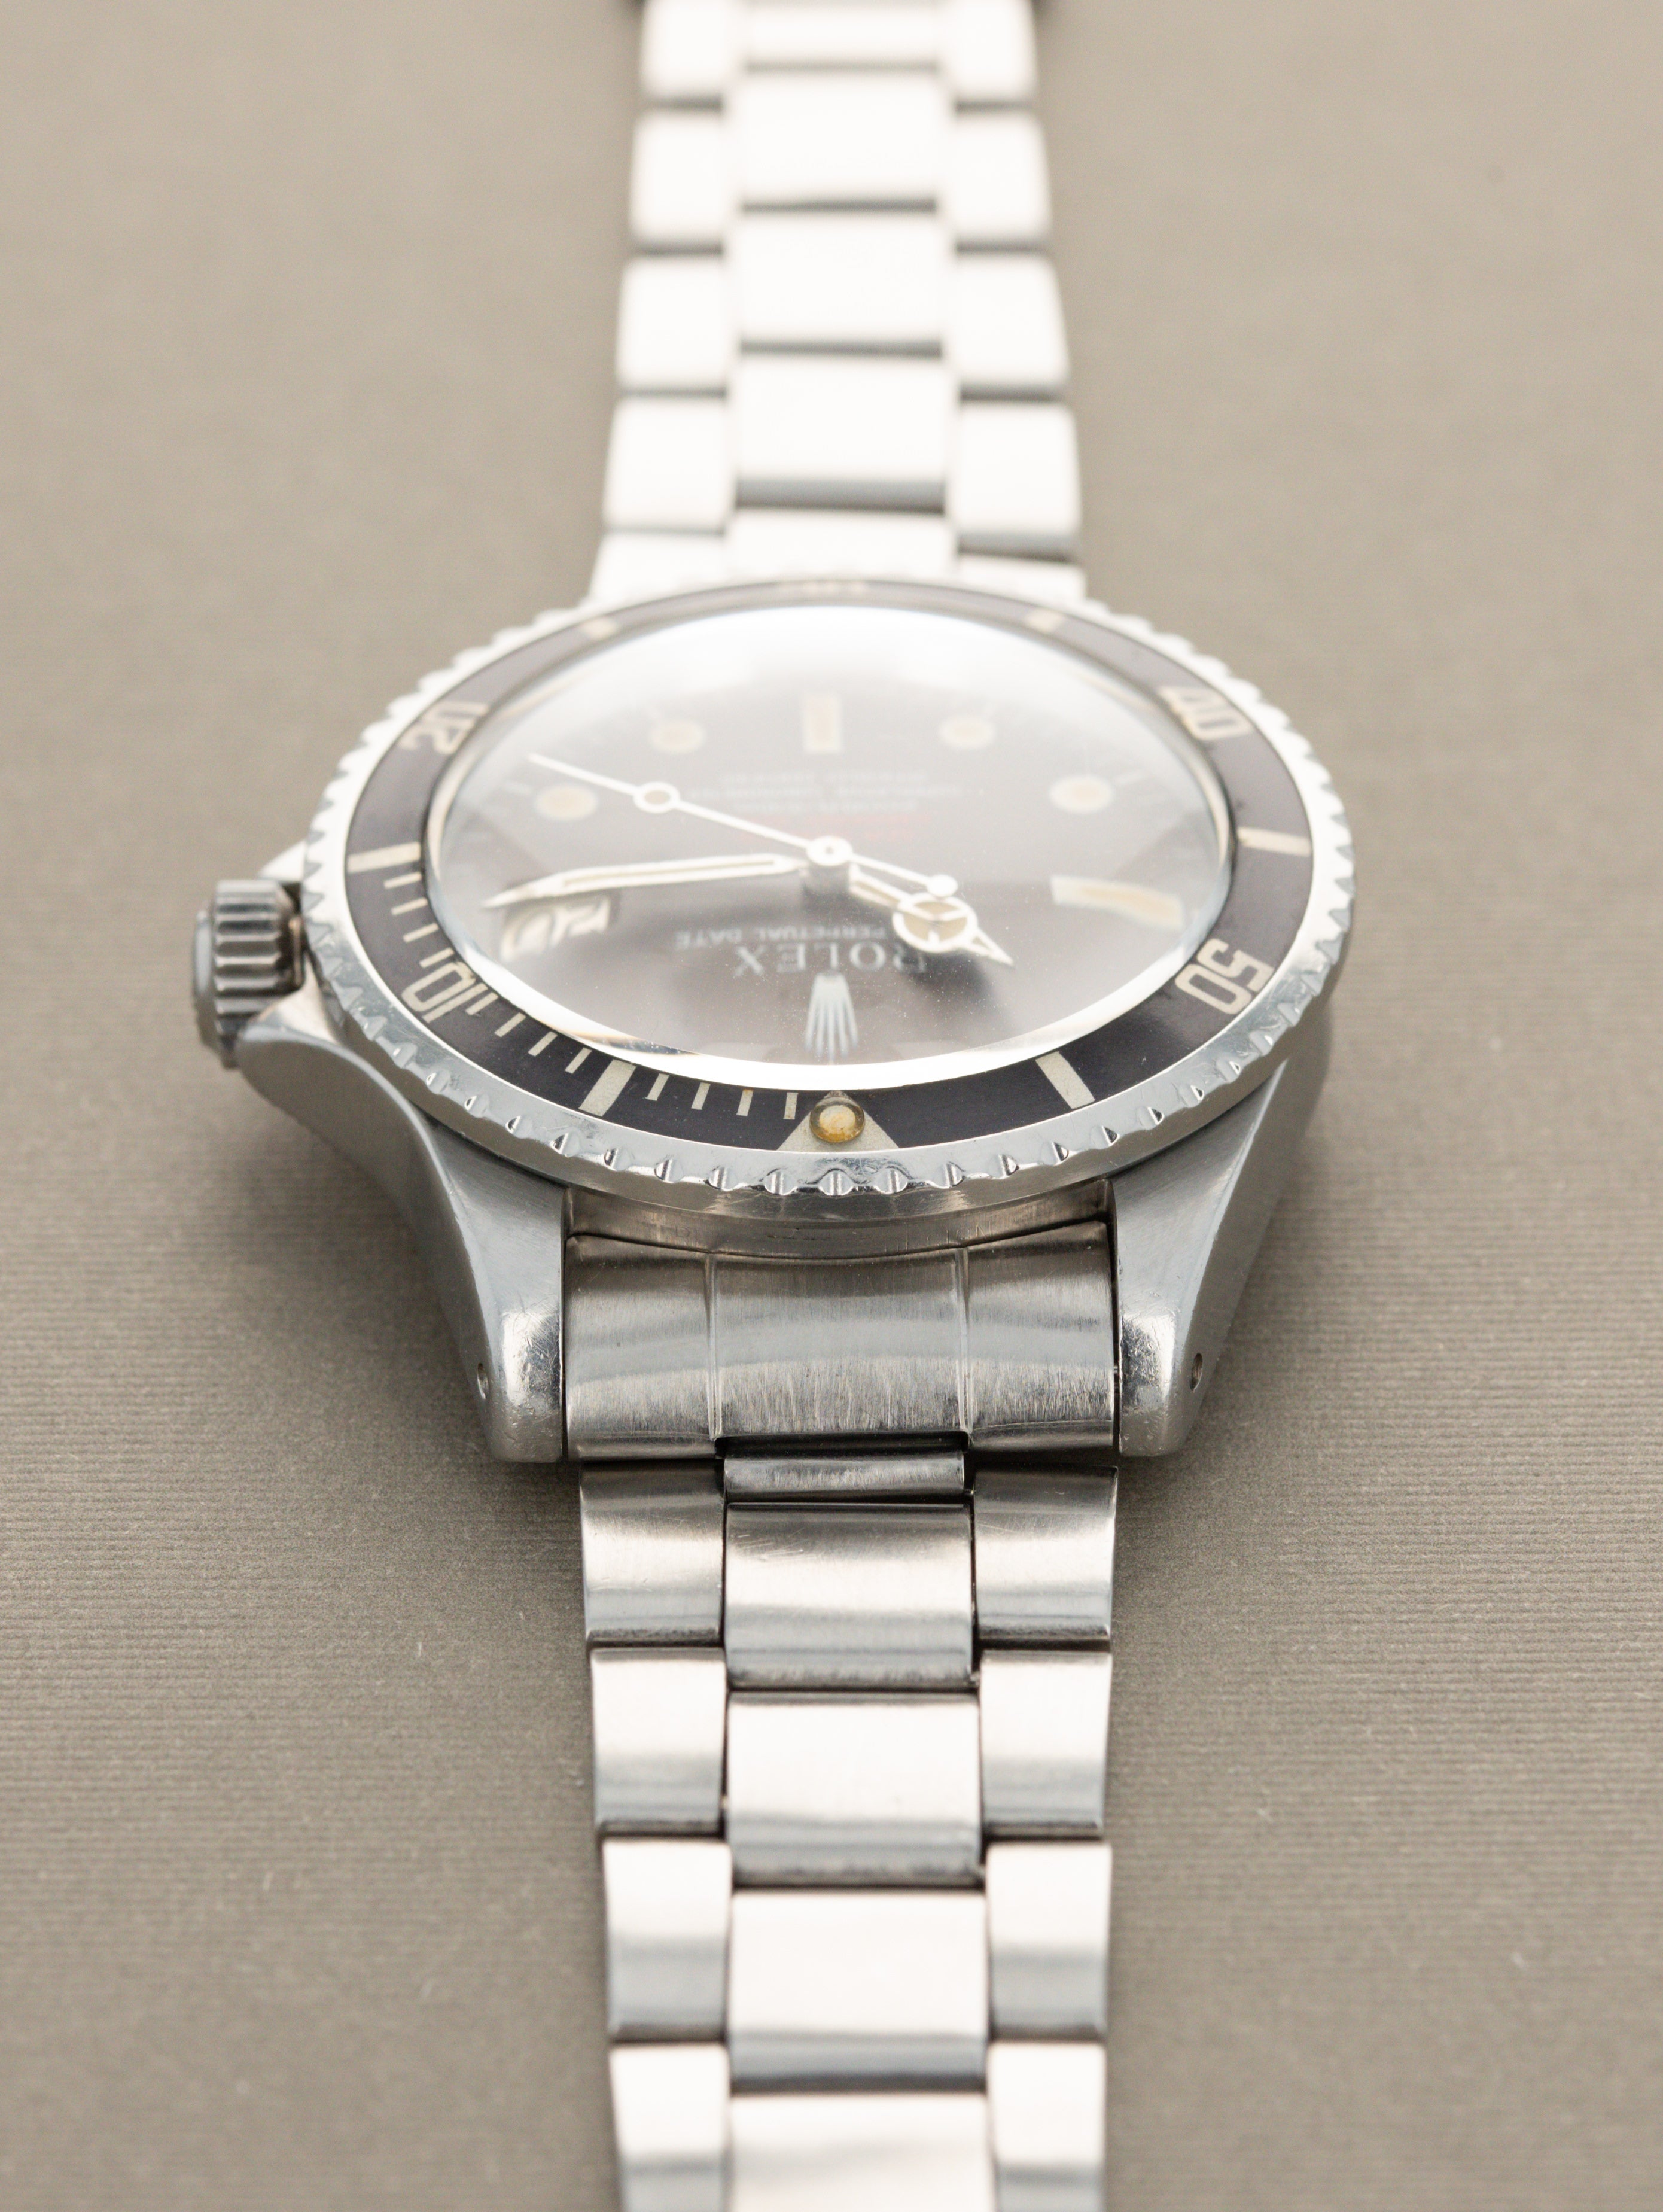 Rolex Sea-Dweller Ref. 1665 - 'Double Red Tropical MK2 Dial Thin Case'